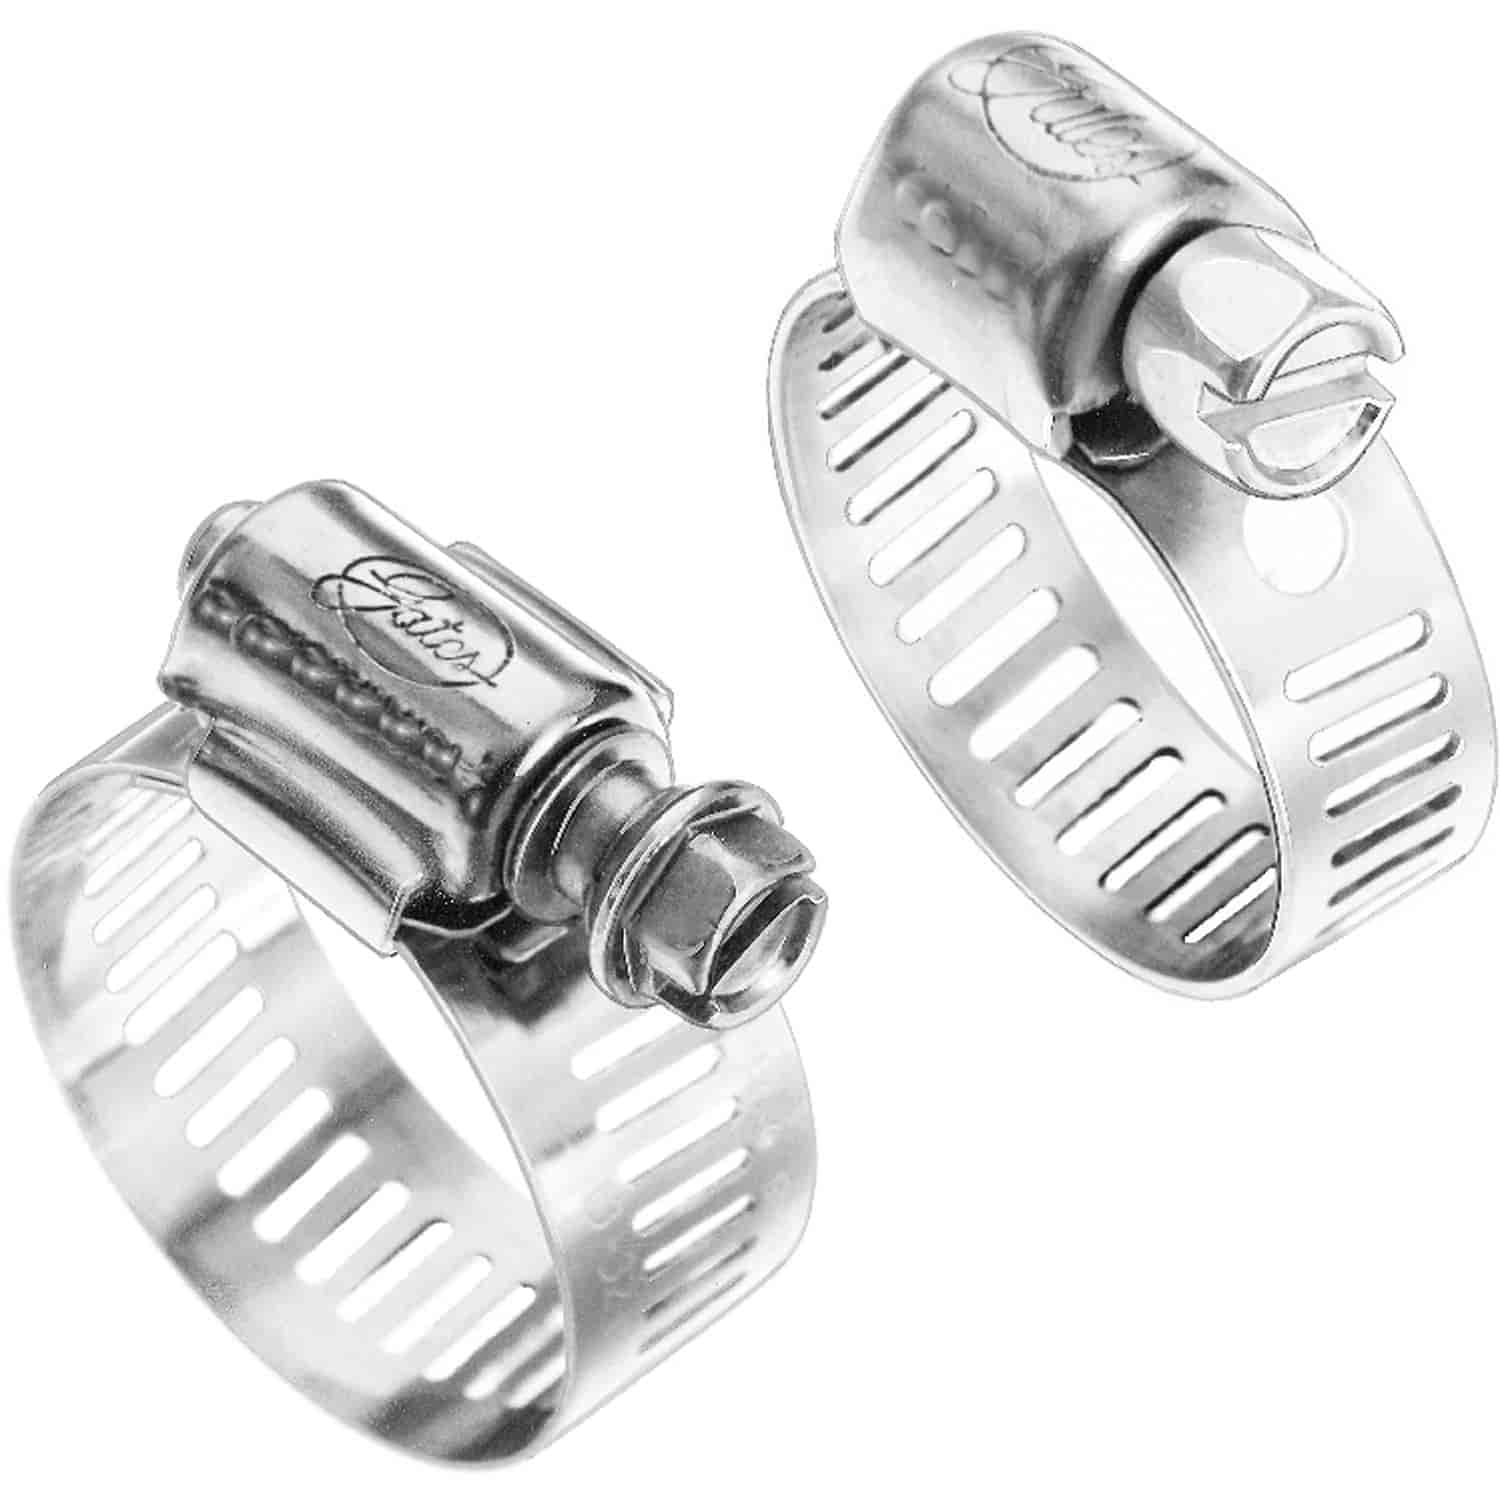 Stainless Steel Hose Clamps Size 32 (1.5" to 2" ID hose)